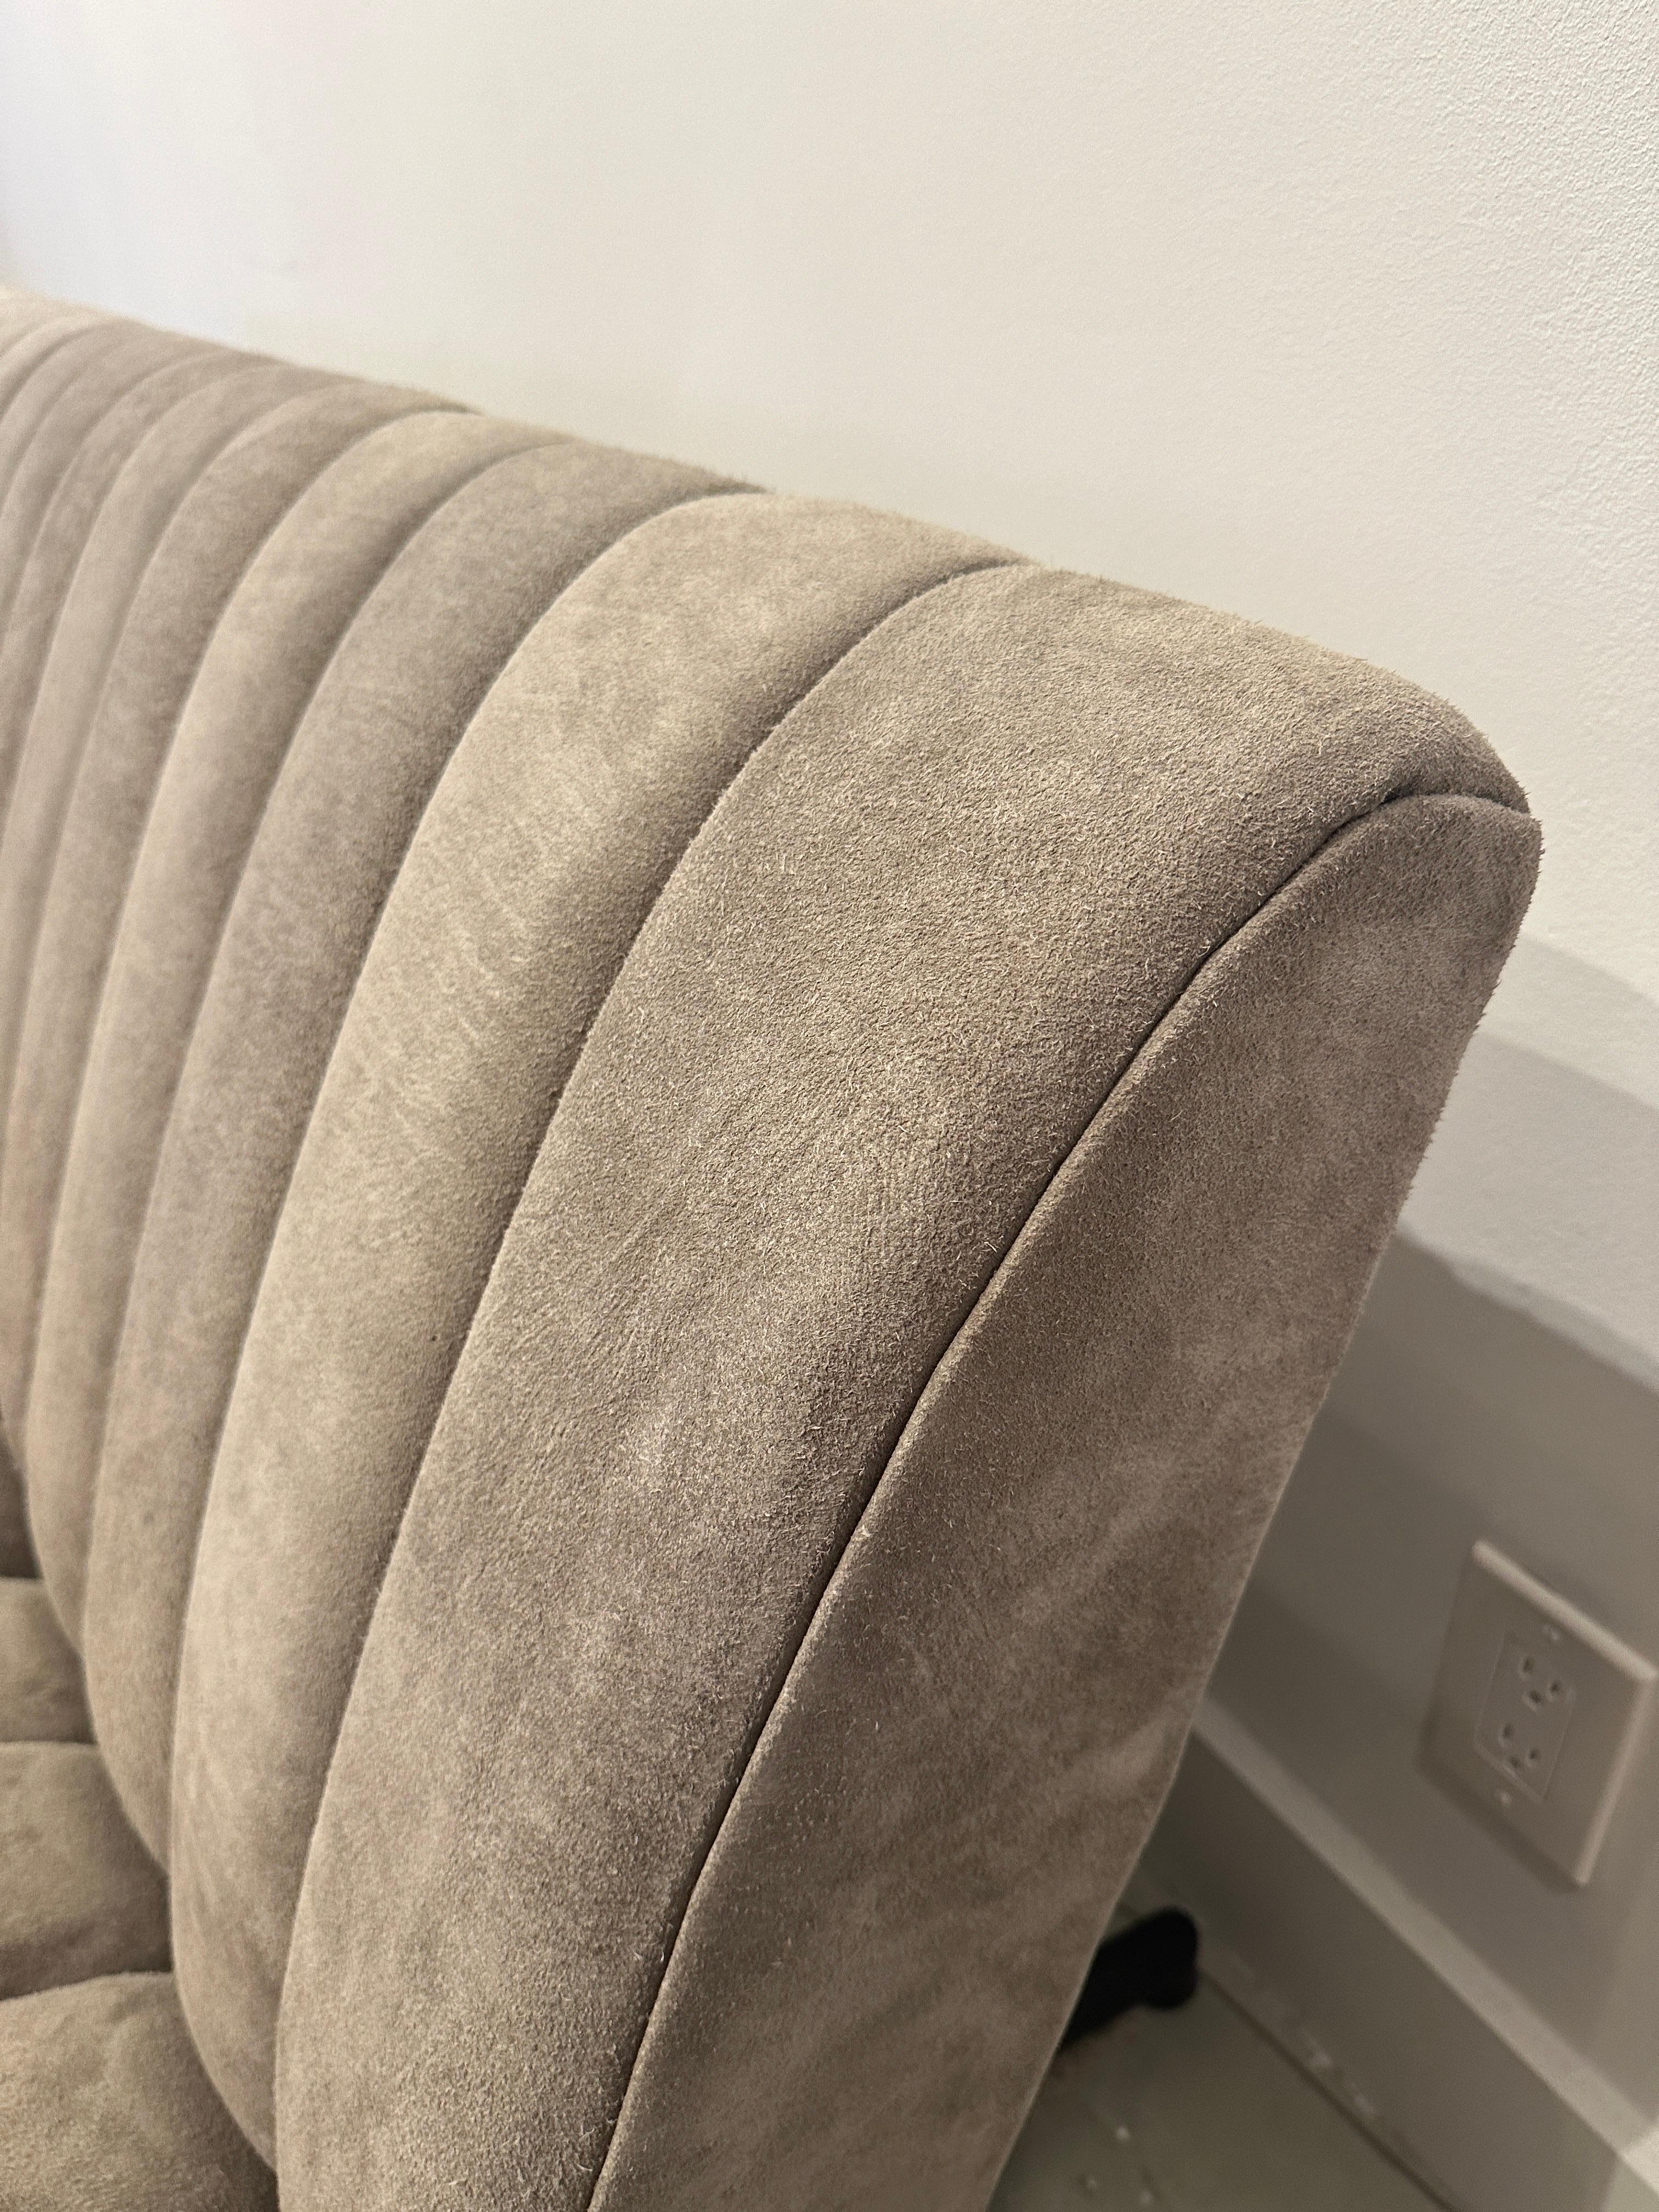 Osvaldo Borsani for Tecno 'D70' Sofa in Gray Suede Leather In Good Condition For Sale In East Hampton, NY